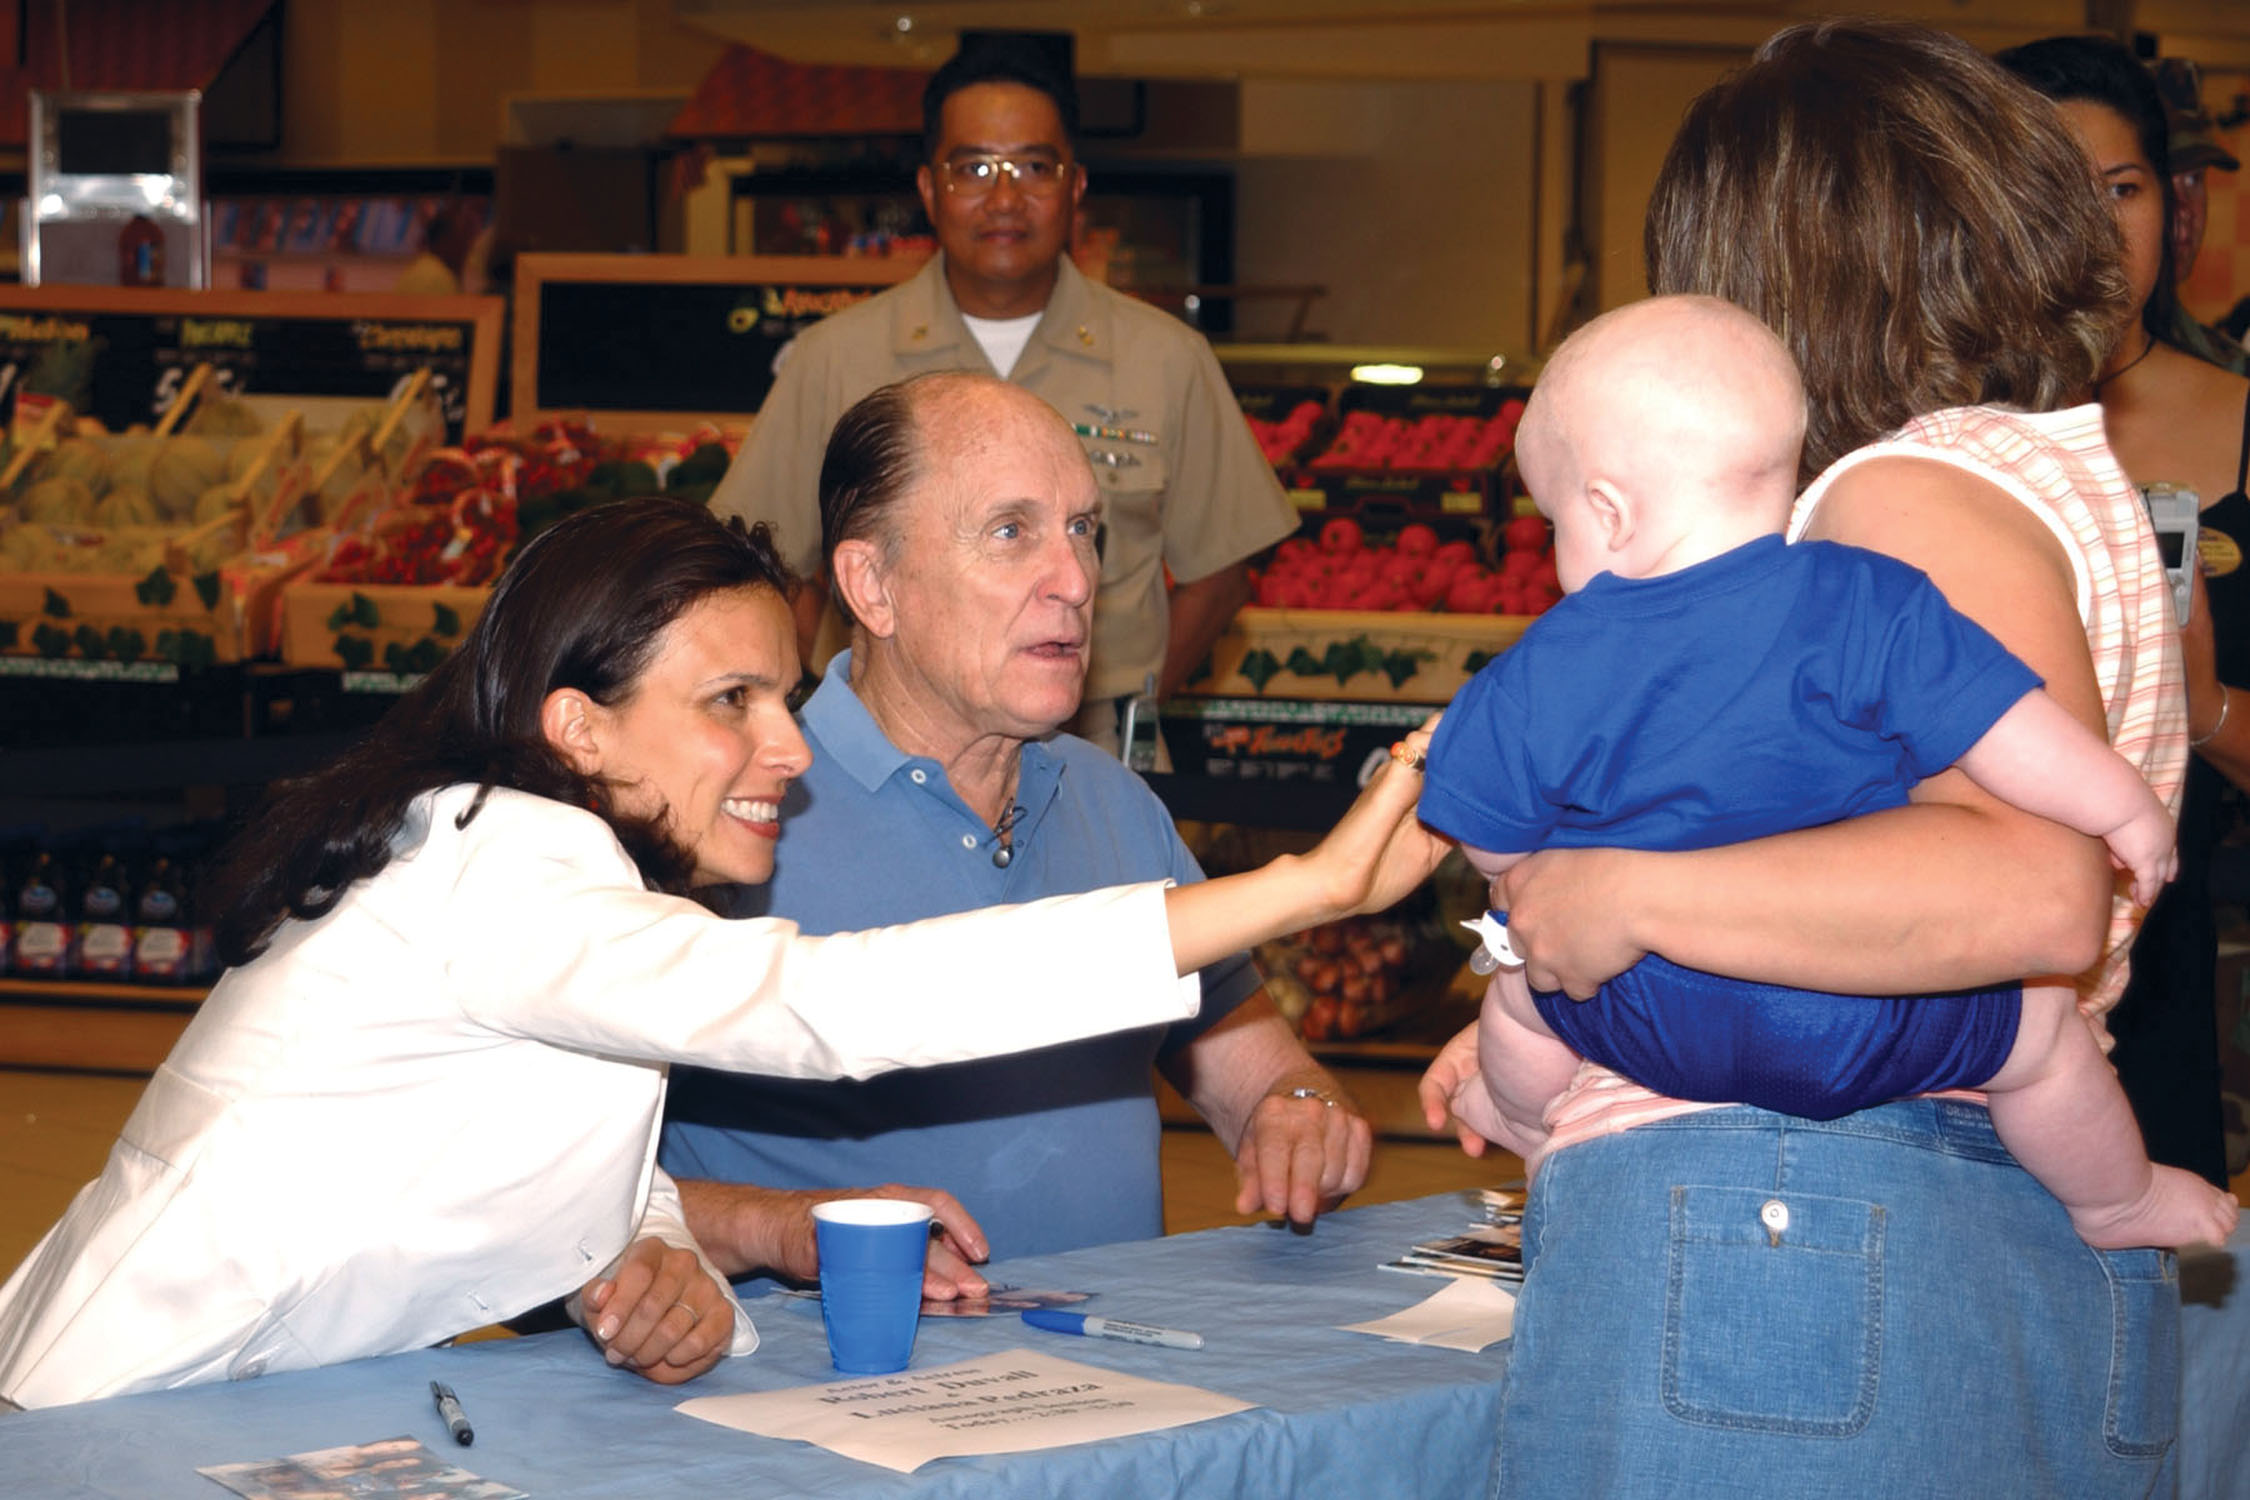 US Navy 030614-N-3983C-001 Actor-Writer-Director Robert Duvall and Actress Luciana Pedraza sign autographs in the Naval Air Station Sigonella Commissary for Sailors and their family members